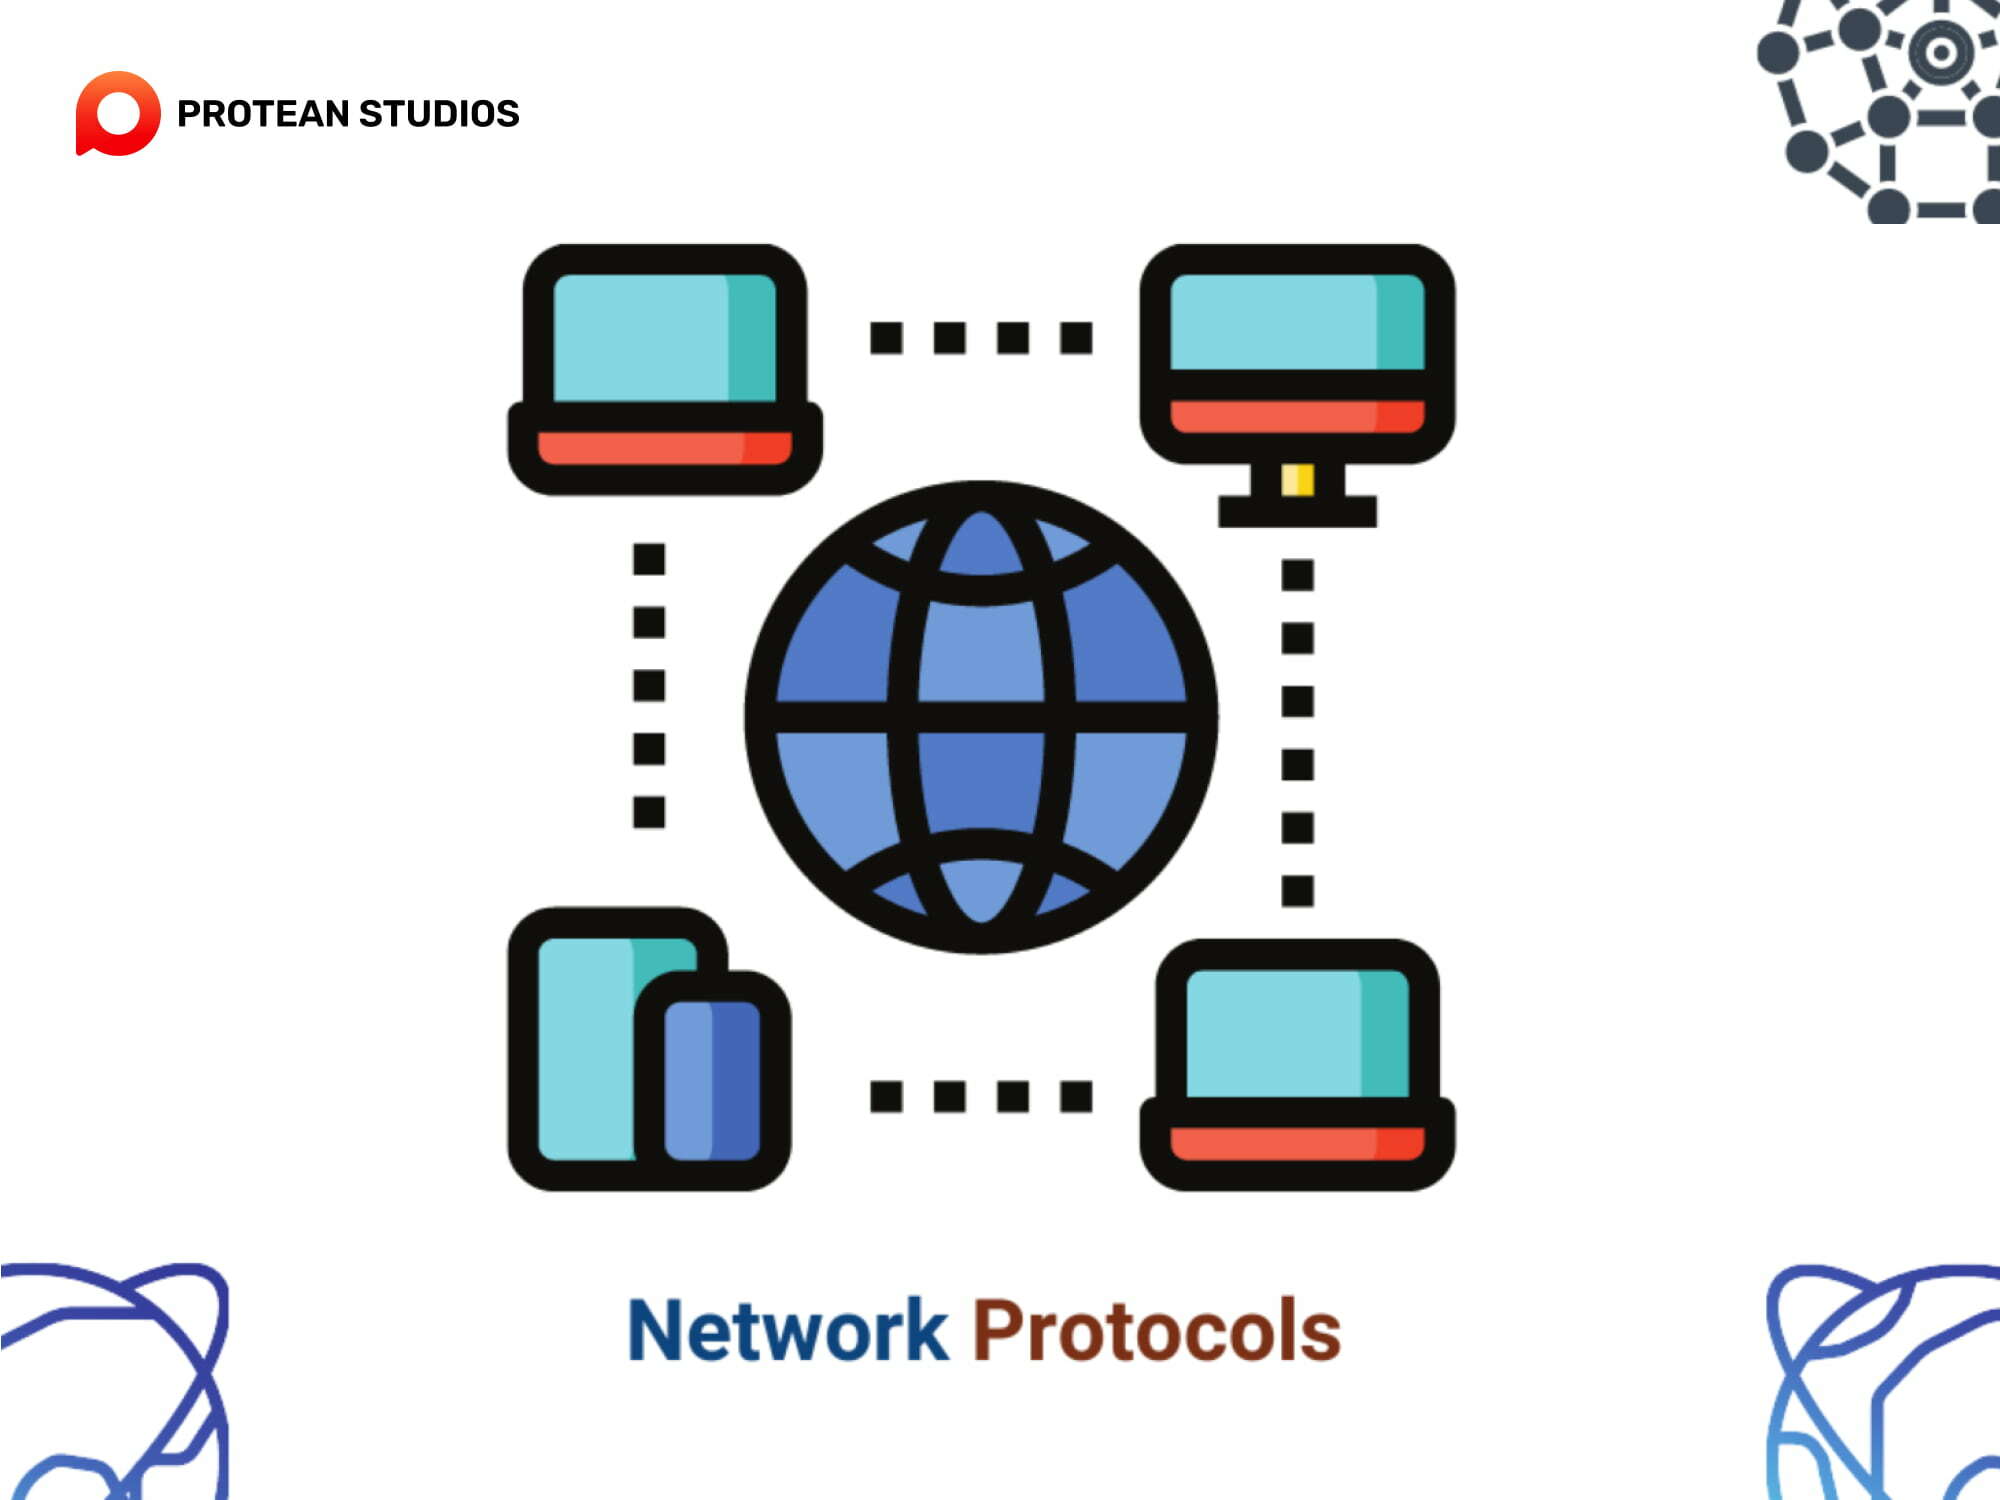 Choose network protocols to develop IoT apps